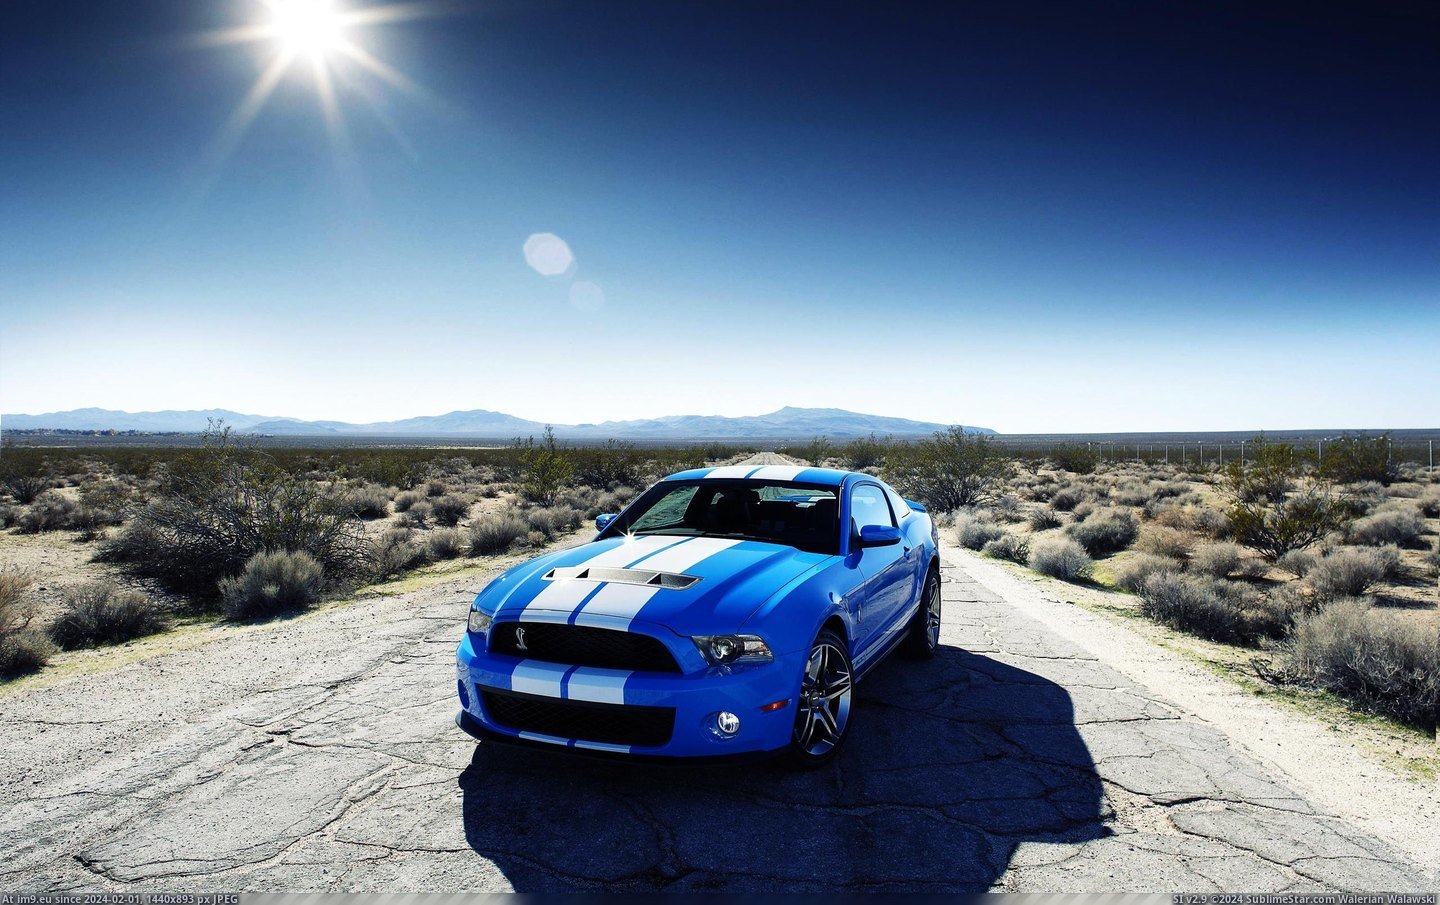 #Wallpaper #Wide #Ford #Gt500 #Car #Shelby Ford Shelby Gt500 Car Wide HD Wallpaper Pic. (Изображение из альбом Unique HD Wallpapers))